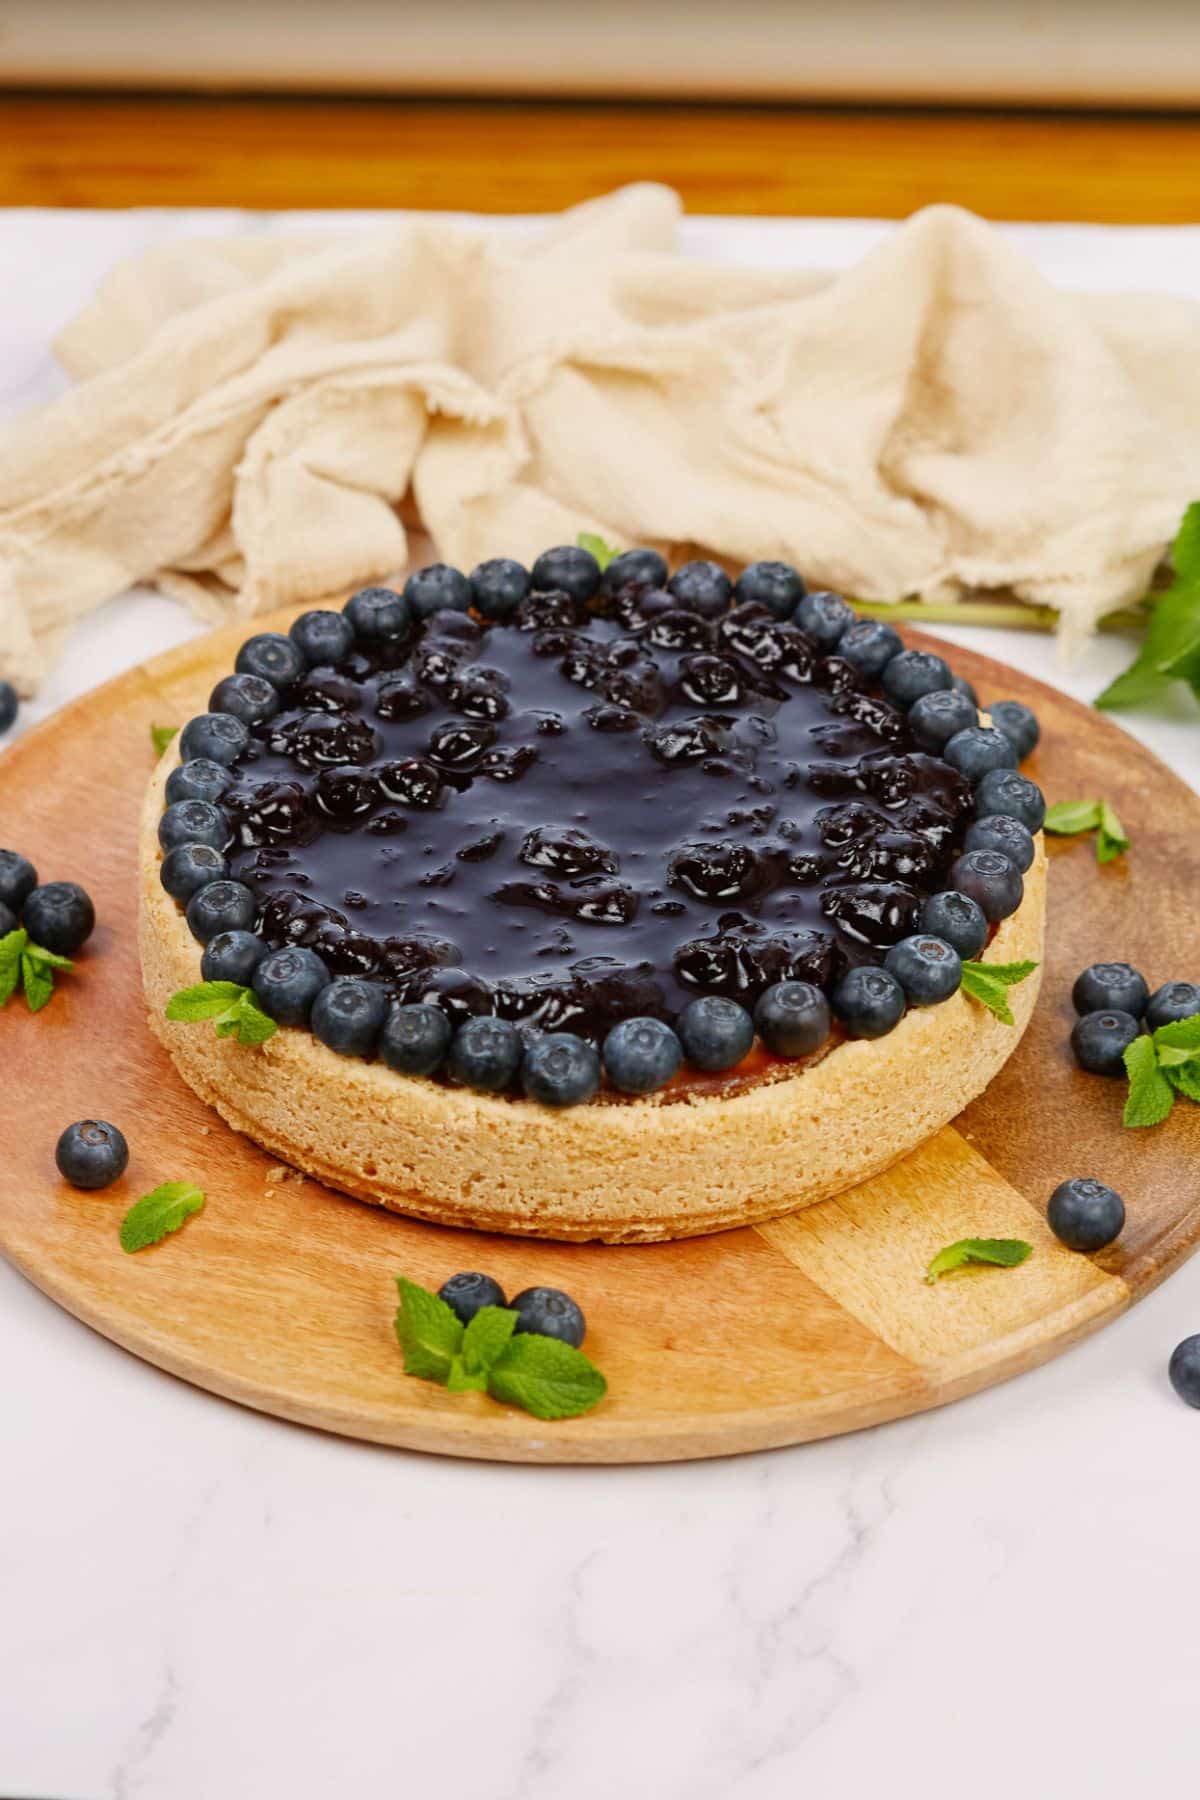 round wood board on table holding vegan cashew cheesecake that has been topped by blueberries